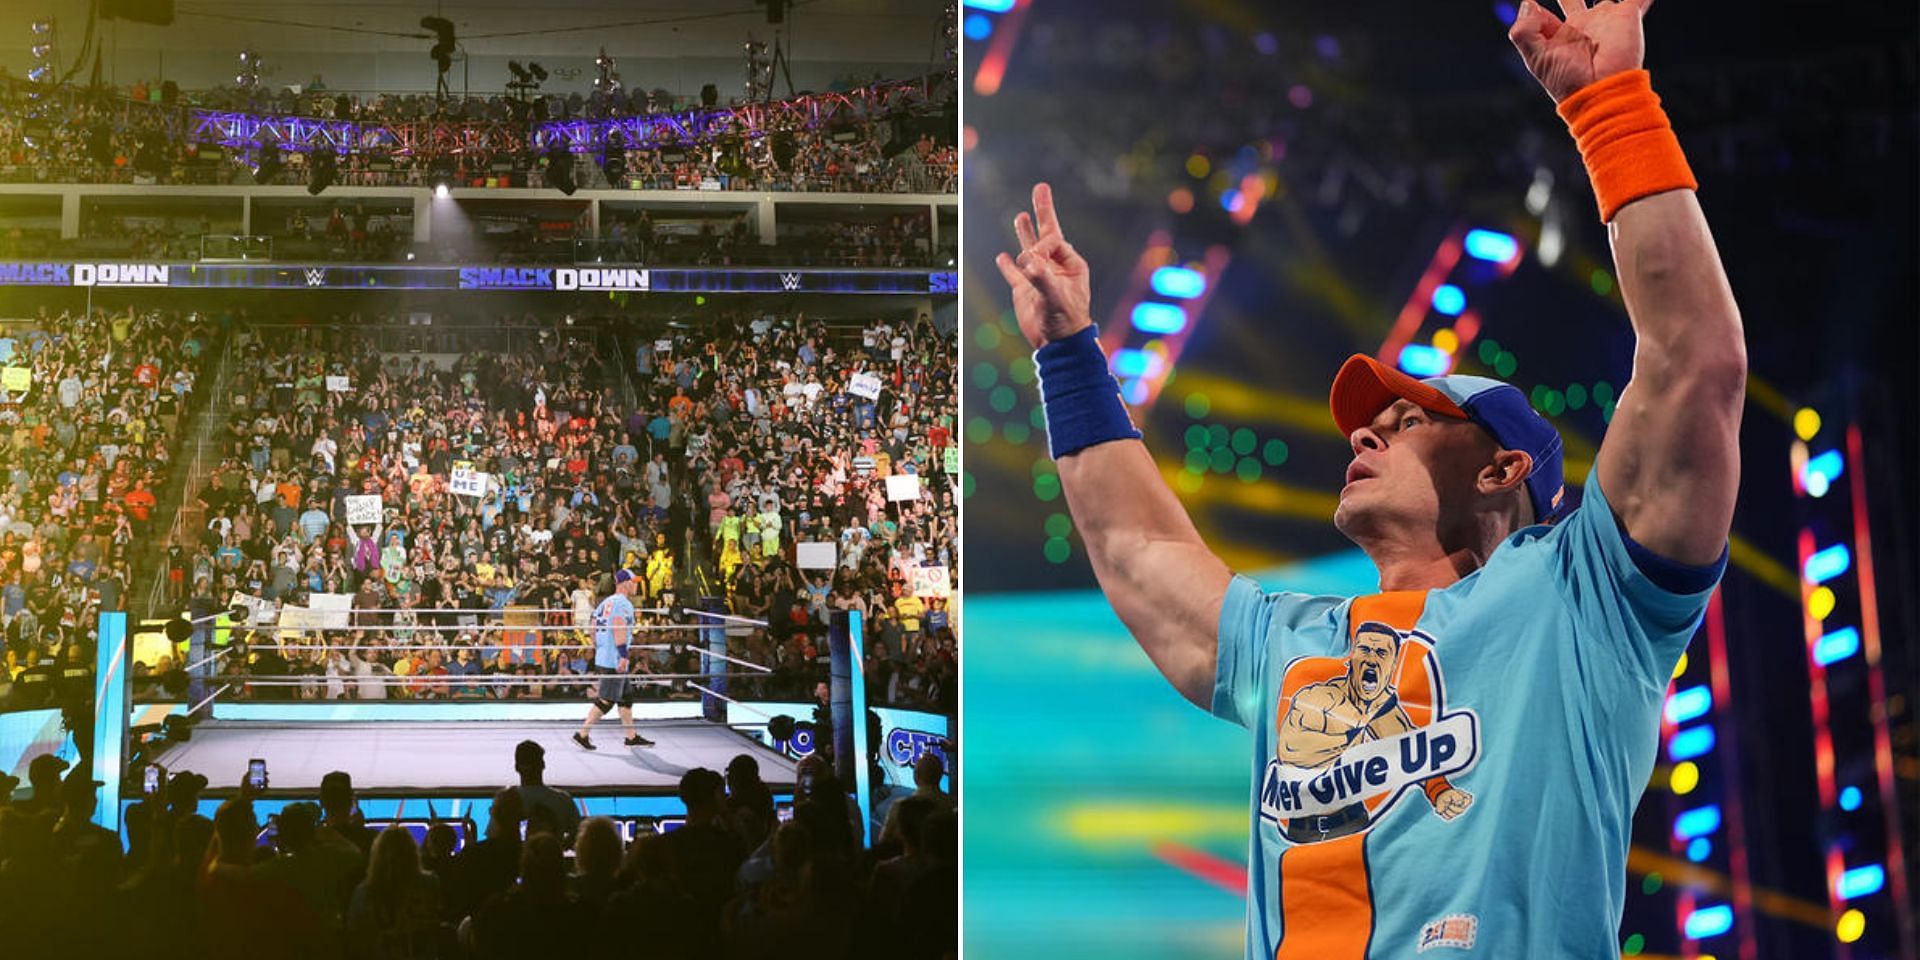 John Cena returned to WWE on SmackDown this week